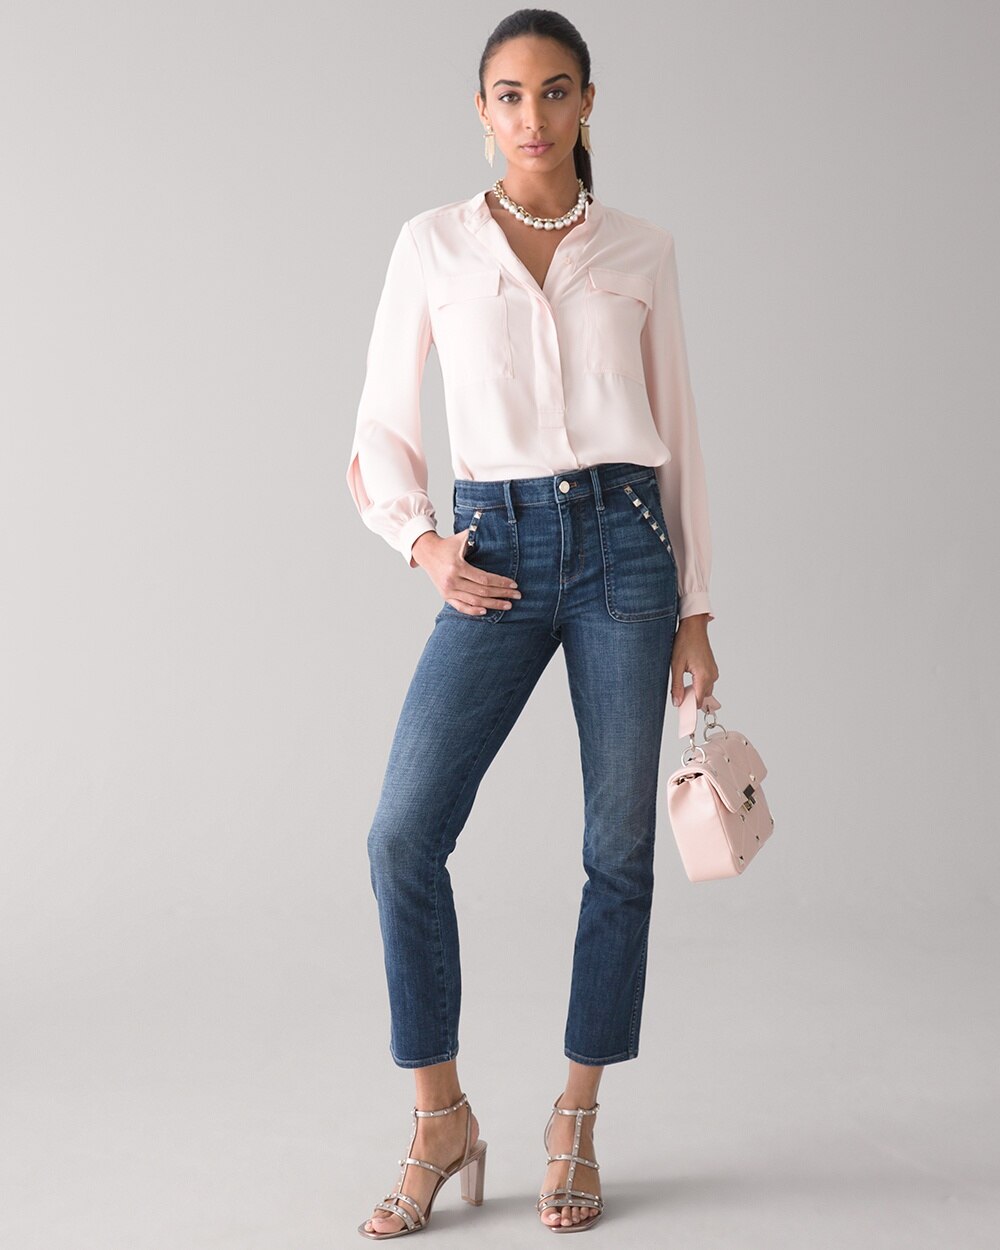 High-Rise Everyday Soft Denim\u2122 Studded Cropped Jeans video preview image, click to start video